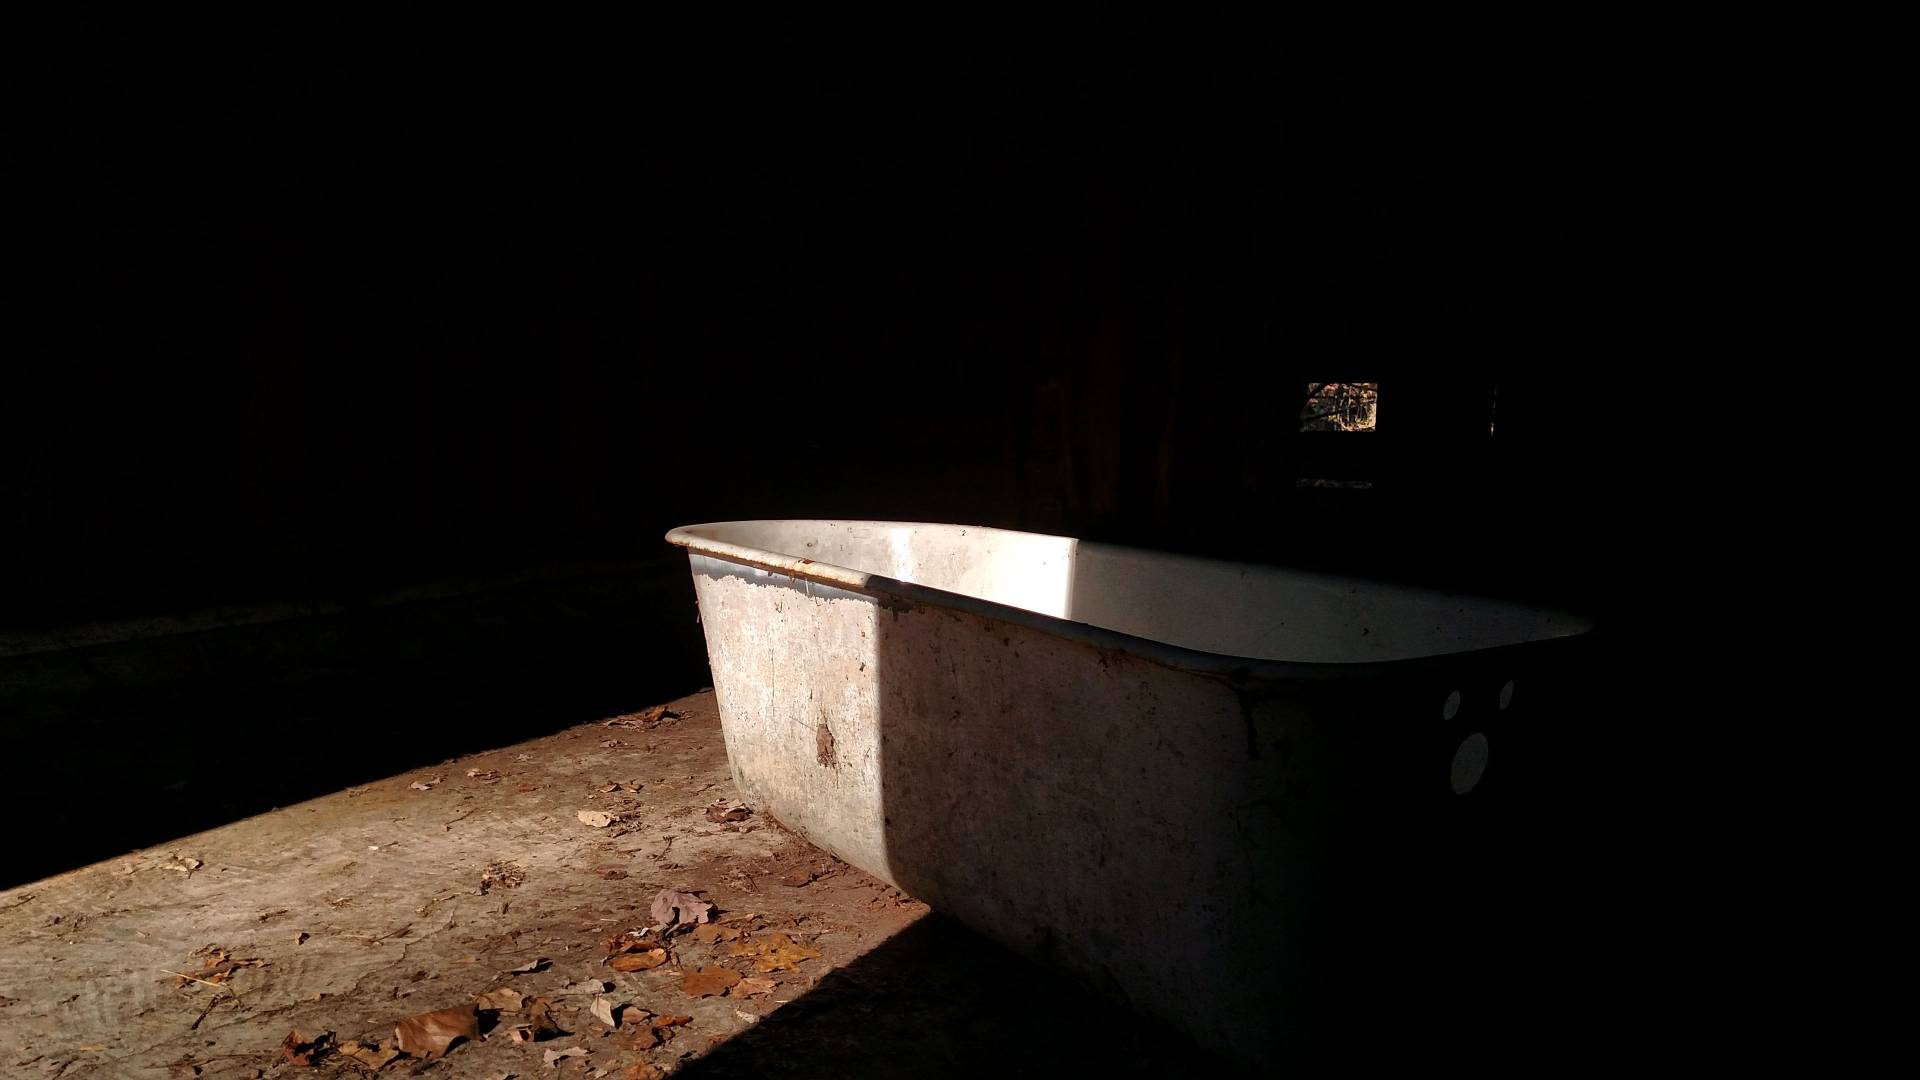 Photograph of an old bath tub in shadow